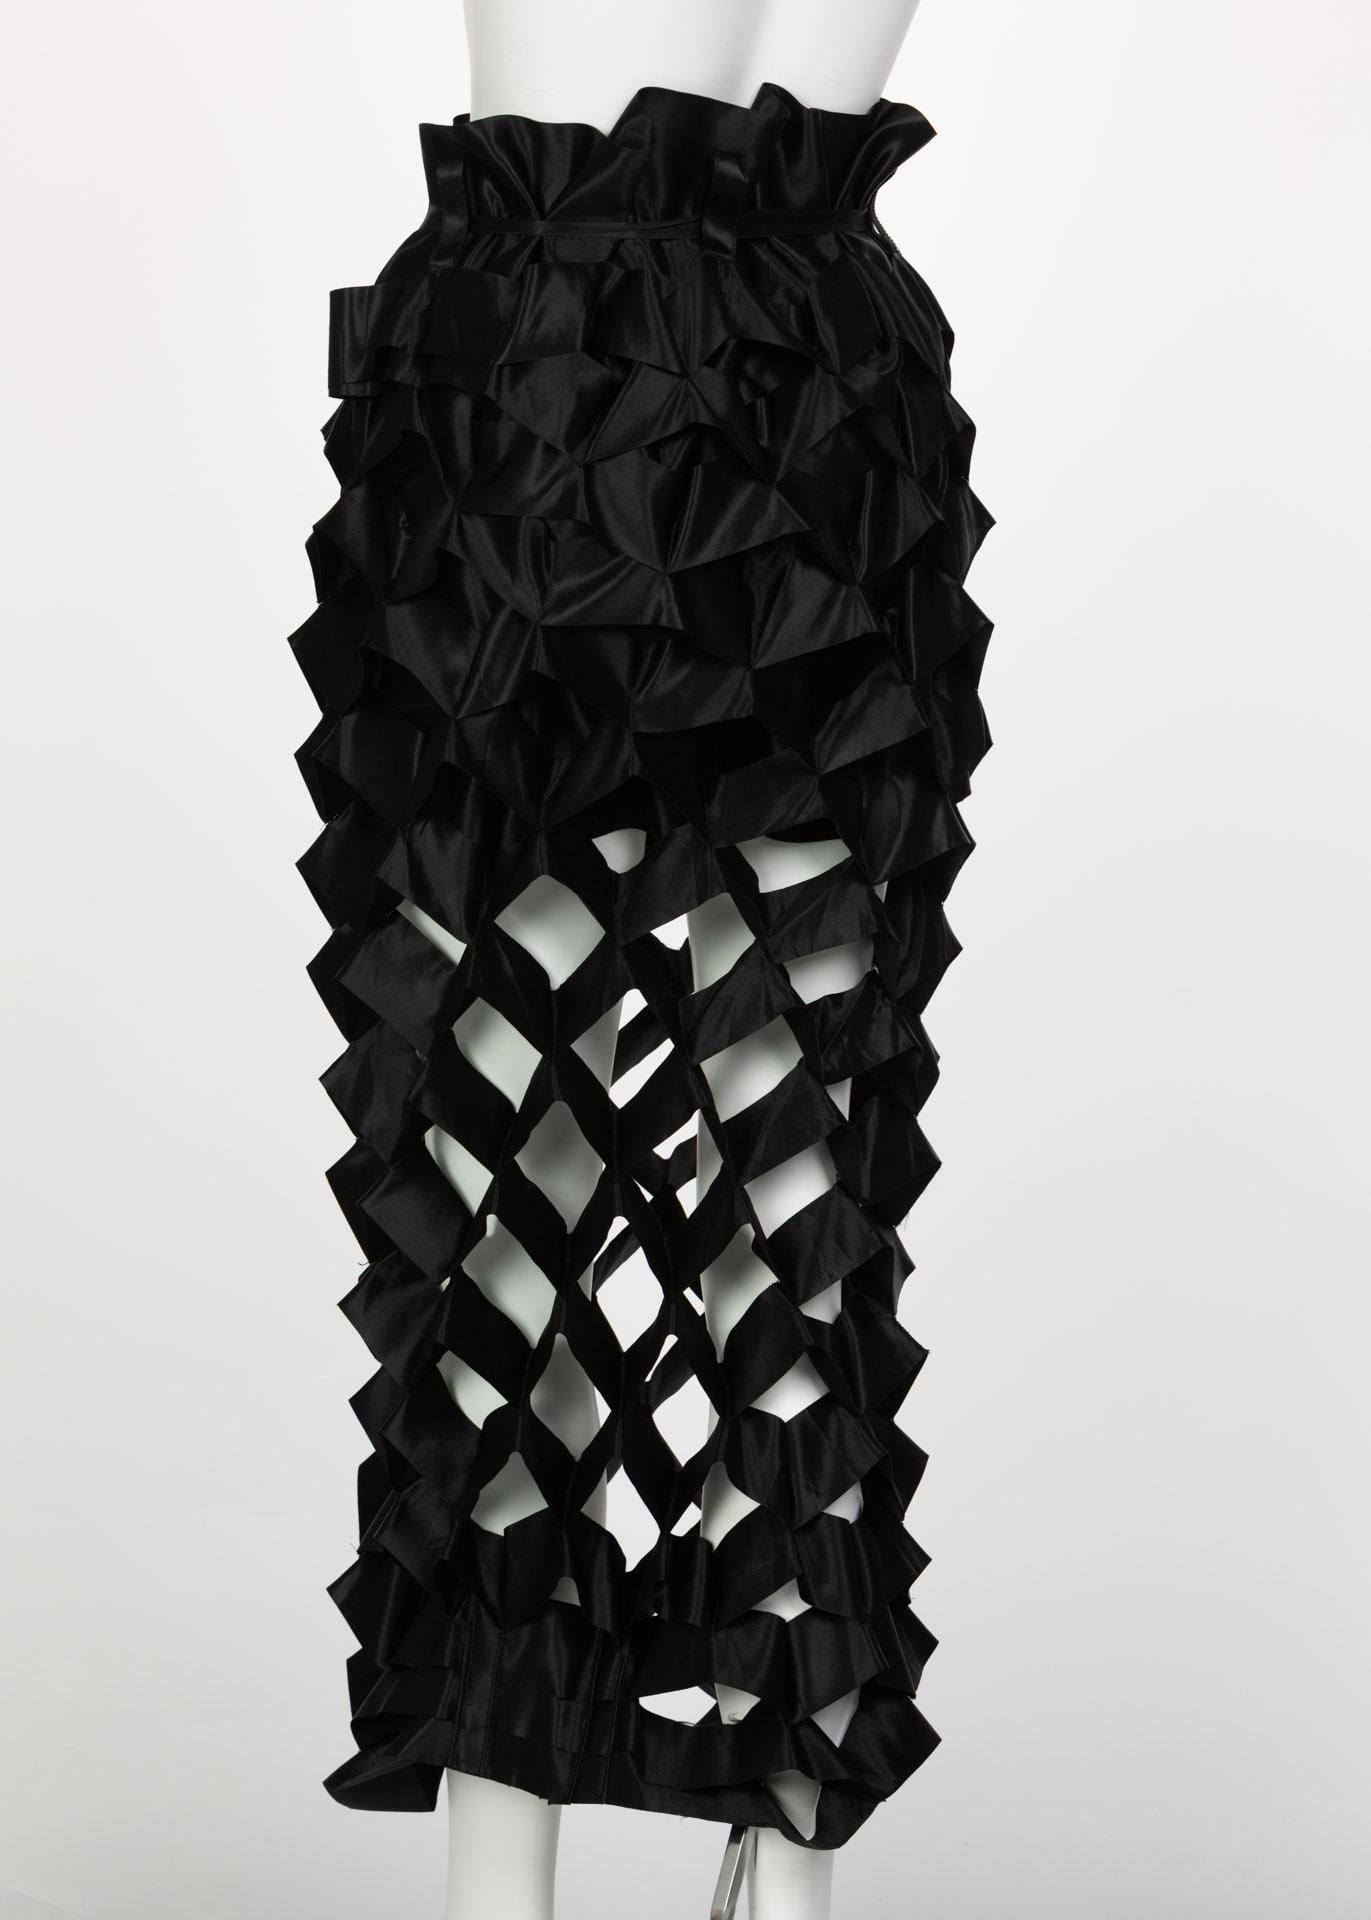 Women's Issey Miyake Black Satin Ribbon Cage Maxi Skirt, 1990s For Sale